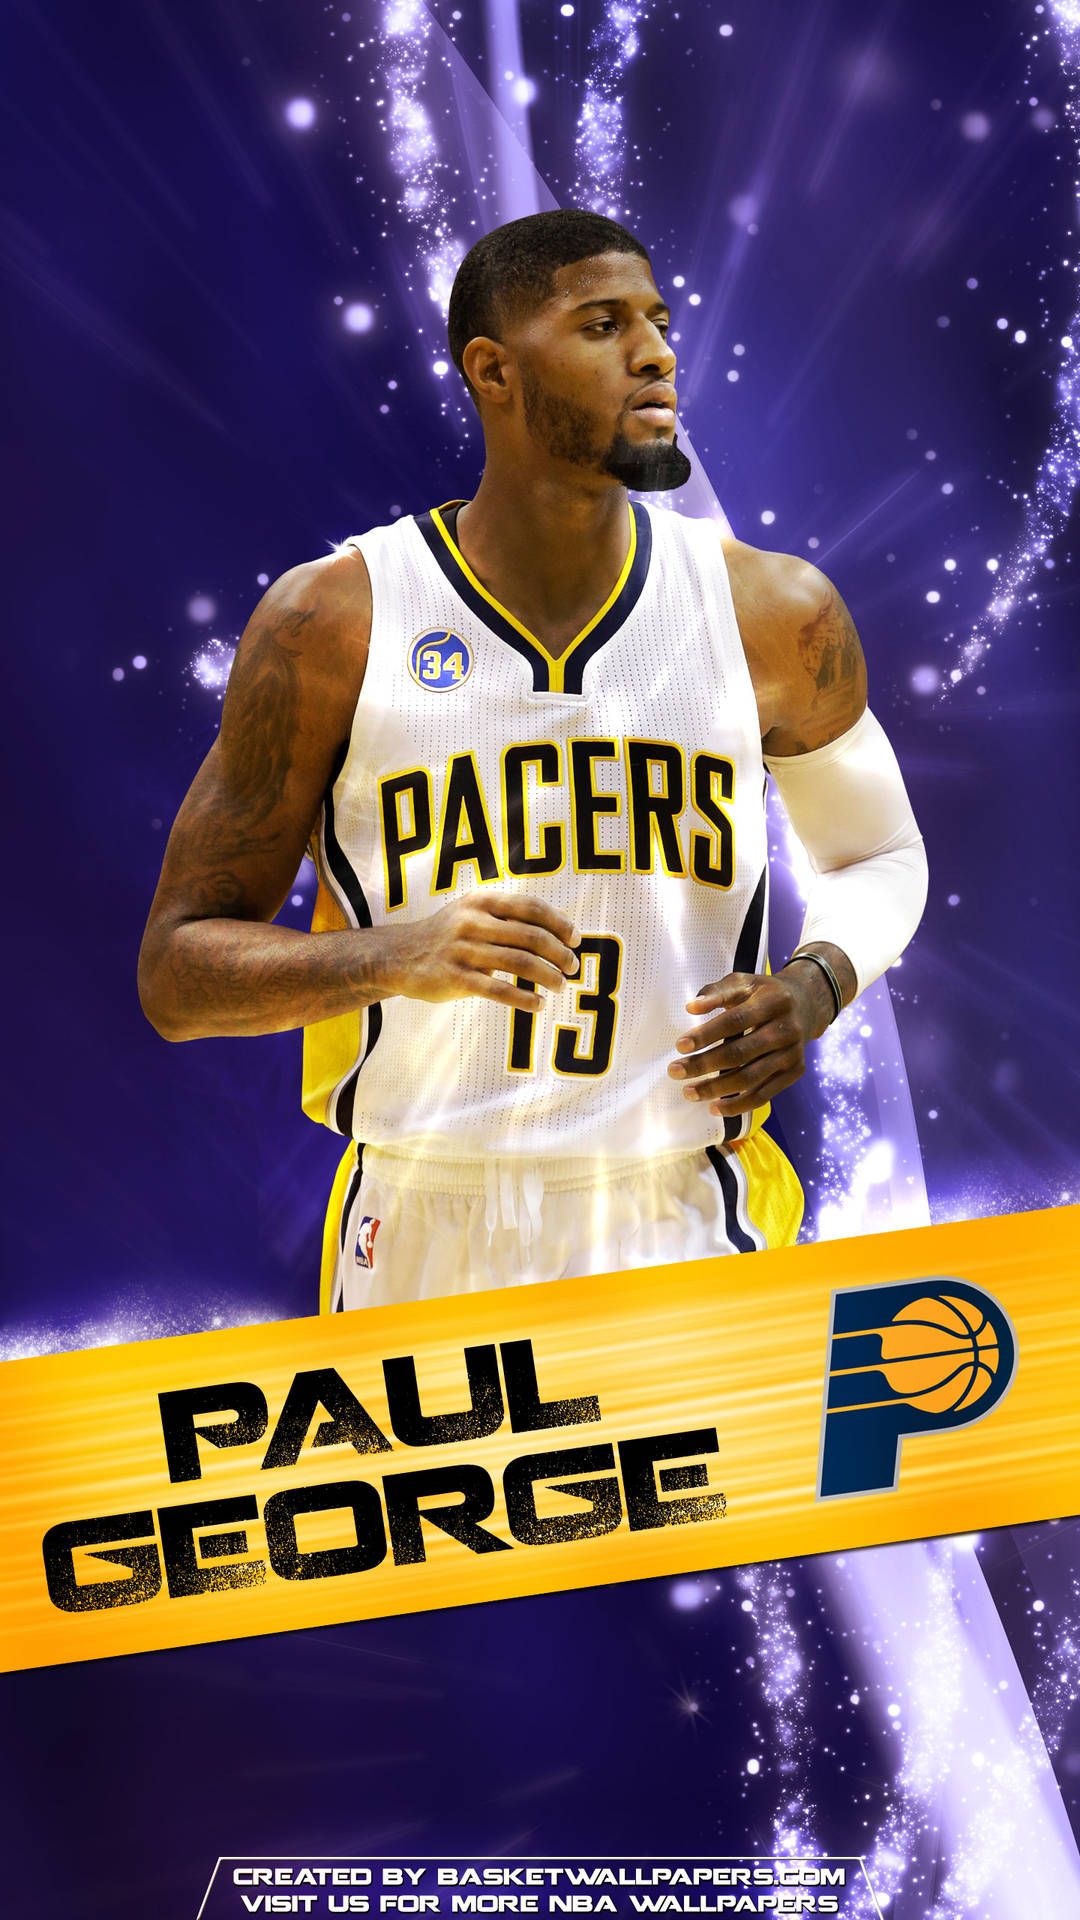 Paul George White Pacers